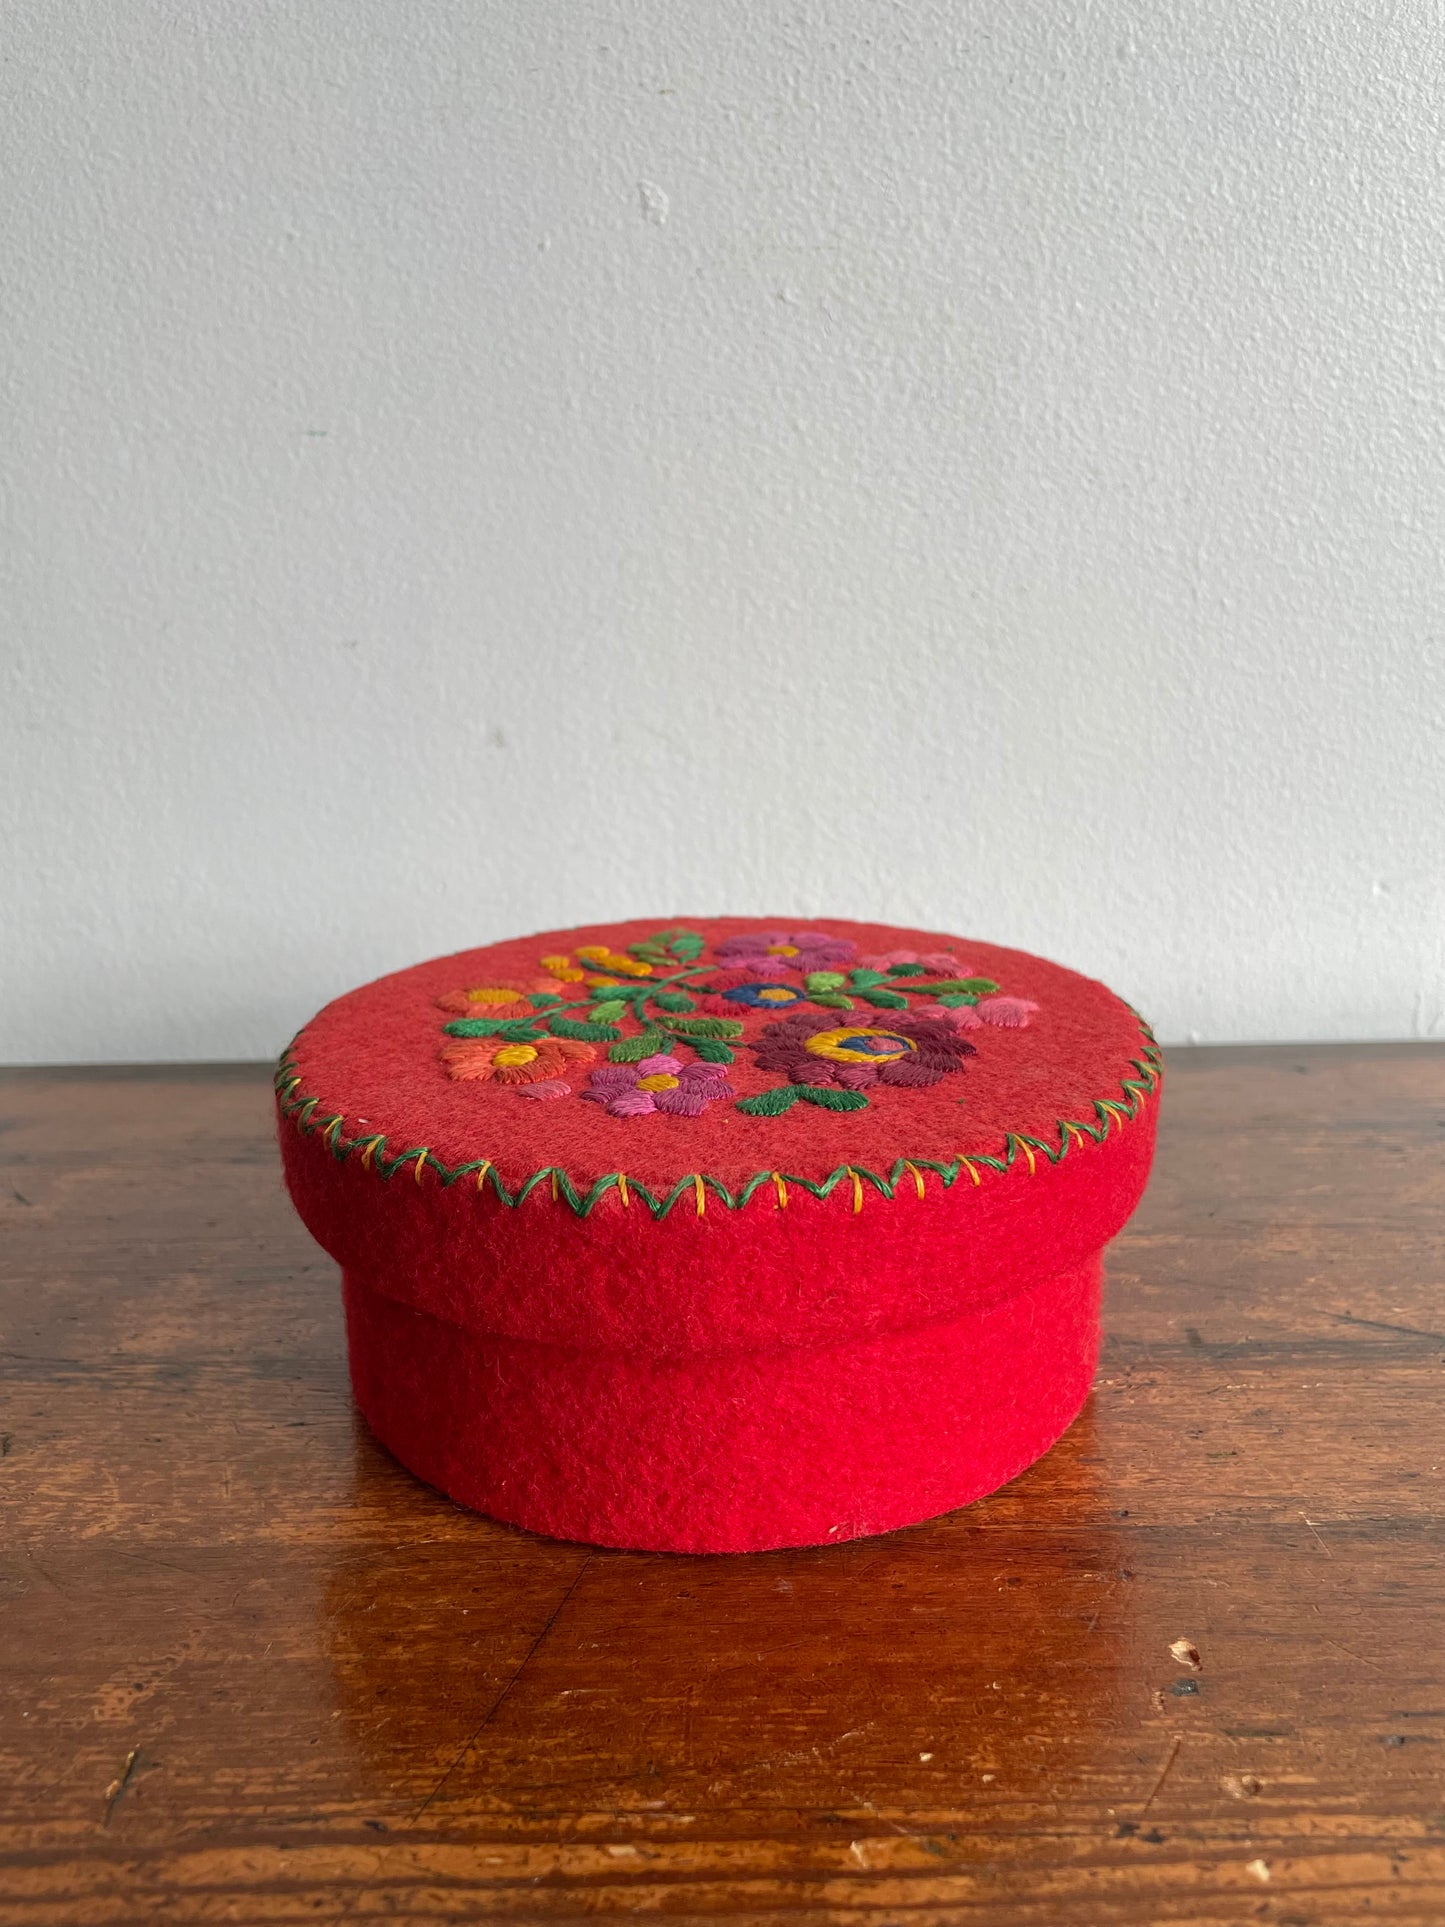 Red Felted Round Trinket Box with Embroidered Flowers on Lid - Hungarian Kalocsa Folk Art Design